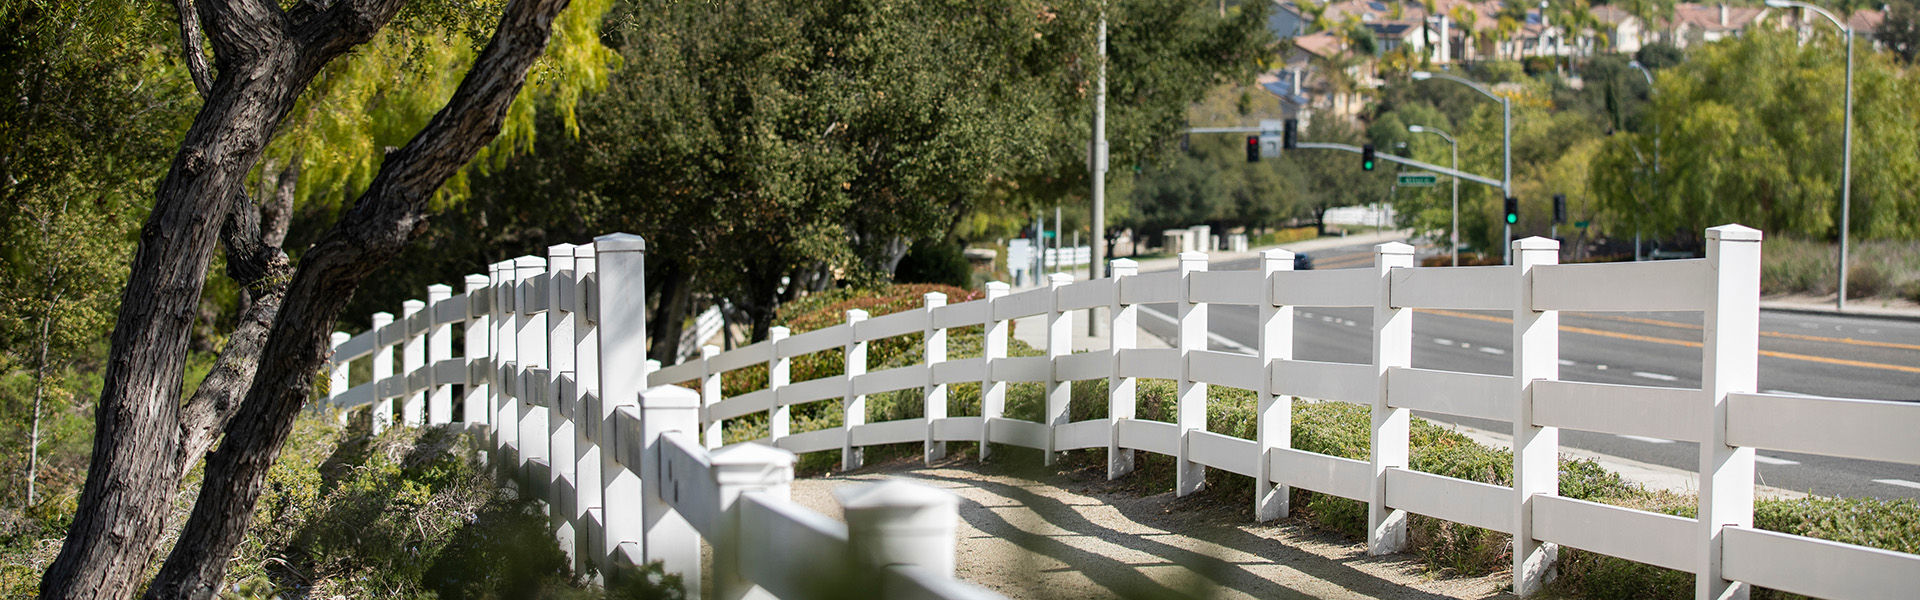 Pepper trees and a white fence frame a public sidewalk in Coto de Caza, California, USA.